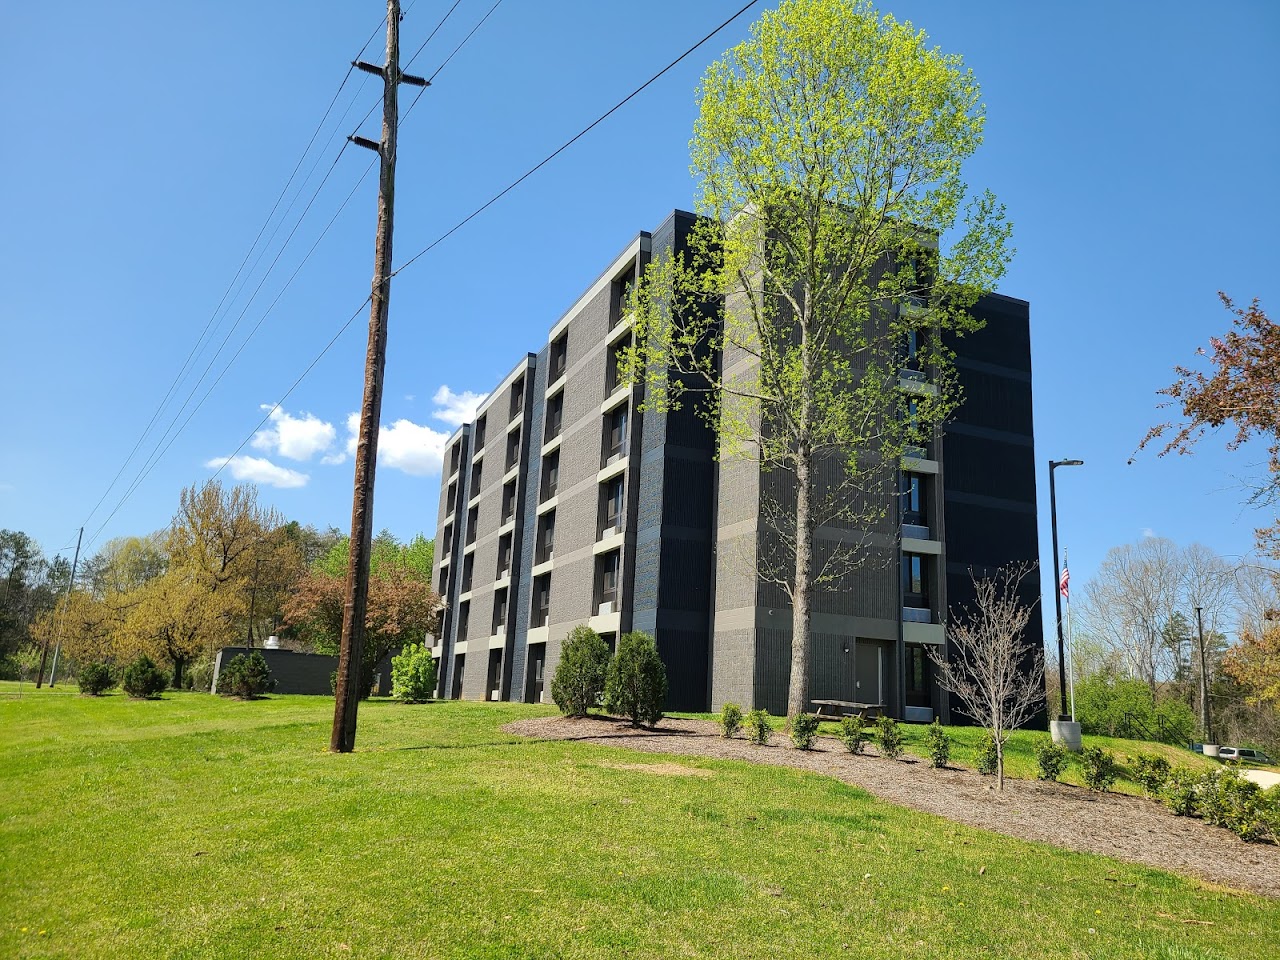 Photo of FRANK CALLAGHAN TOWERS. Affordable housing located at 115 FAIRBANKS ROAD OAK RIDGE, TN 37830